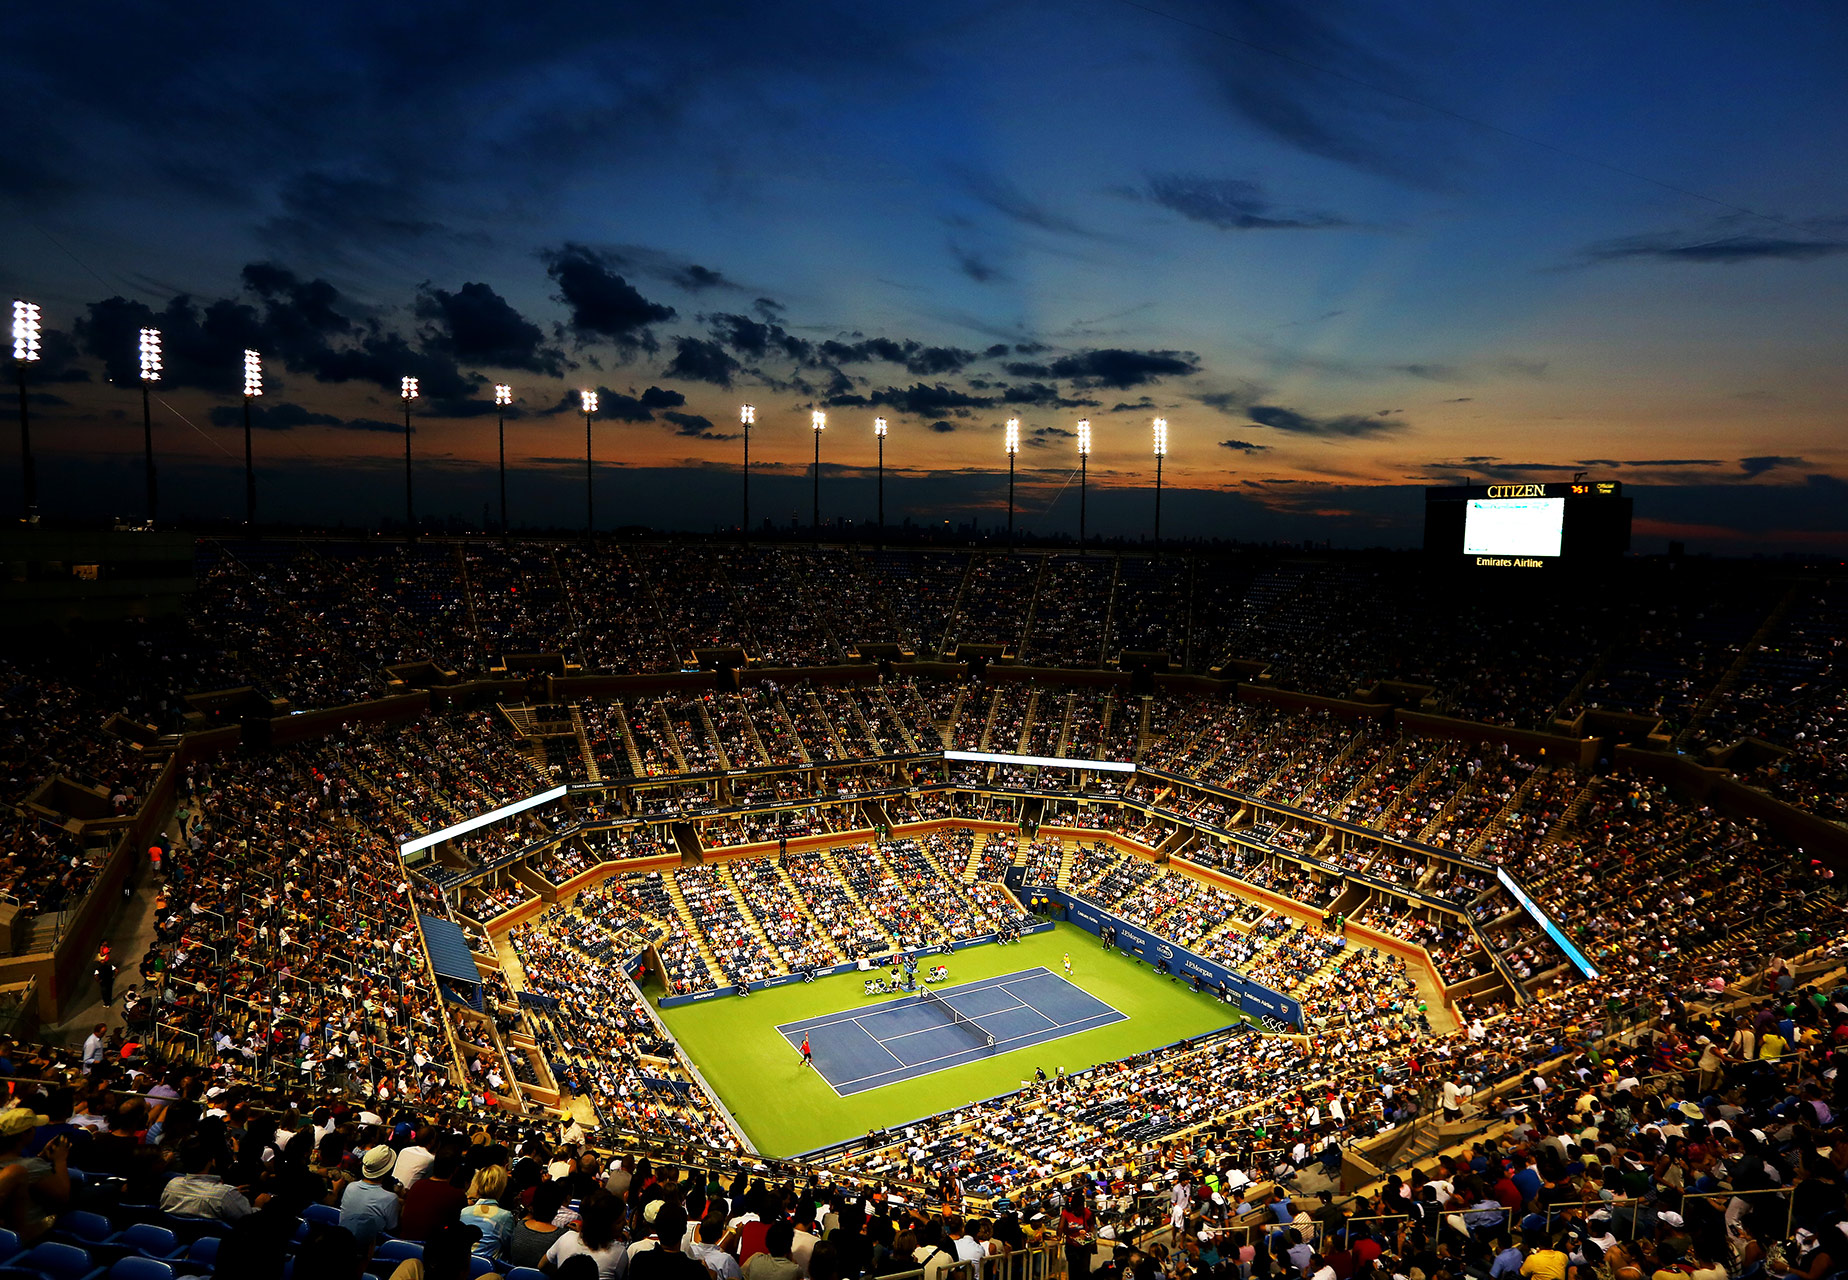 US Open-US Open Tennis Championship: Session 13 - Men's/Women's Round of 16 tickets price and order